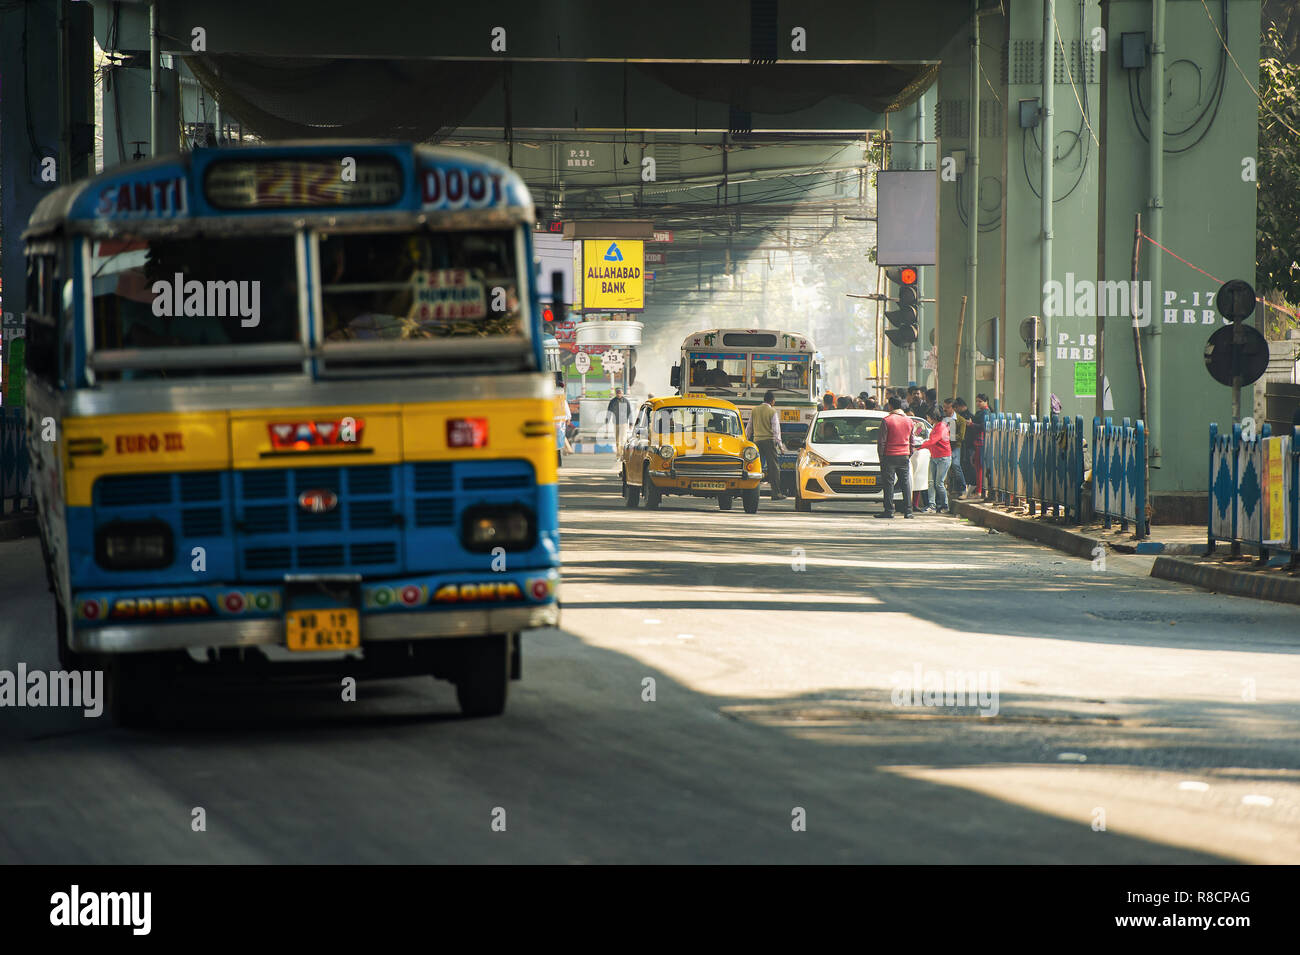 Some Ambassador cab taxi, buses and people through the streets of Kolkata. Stock Photo